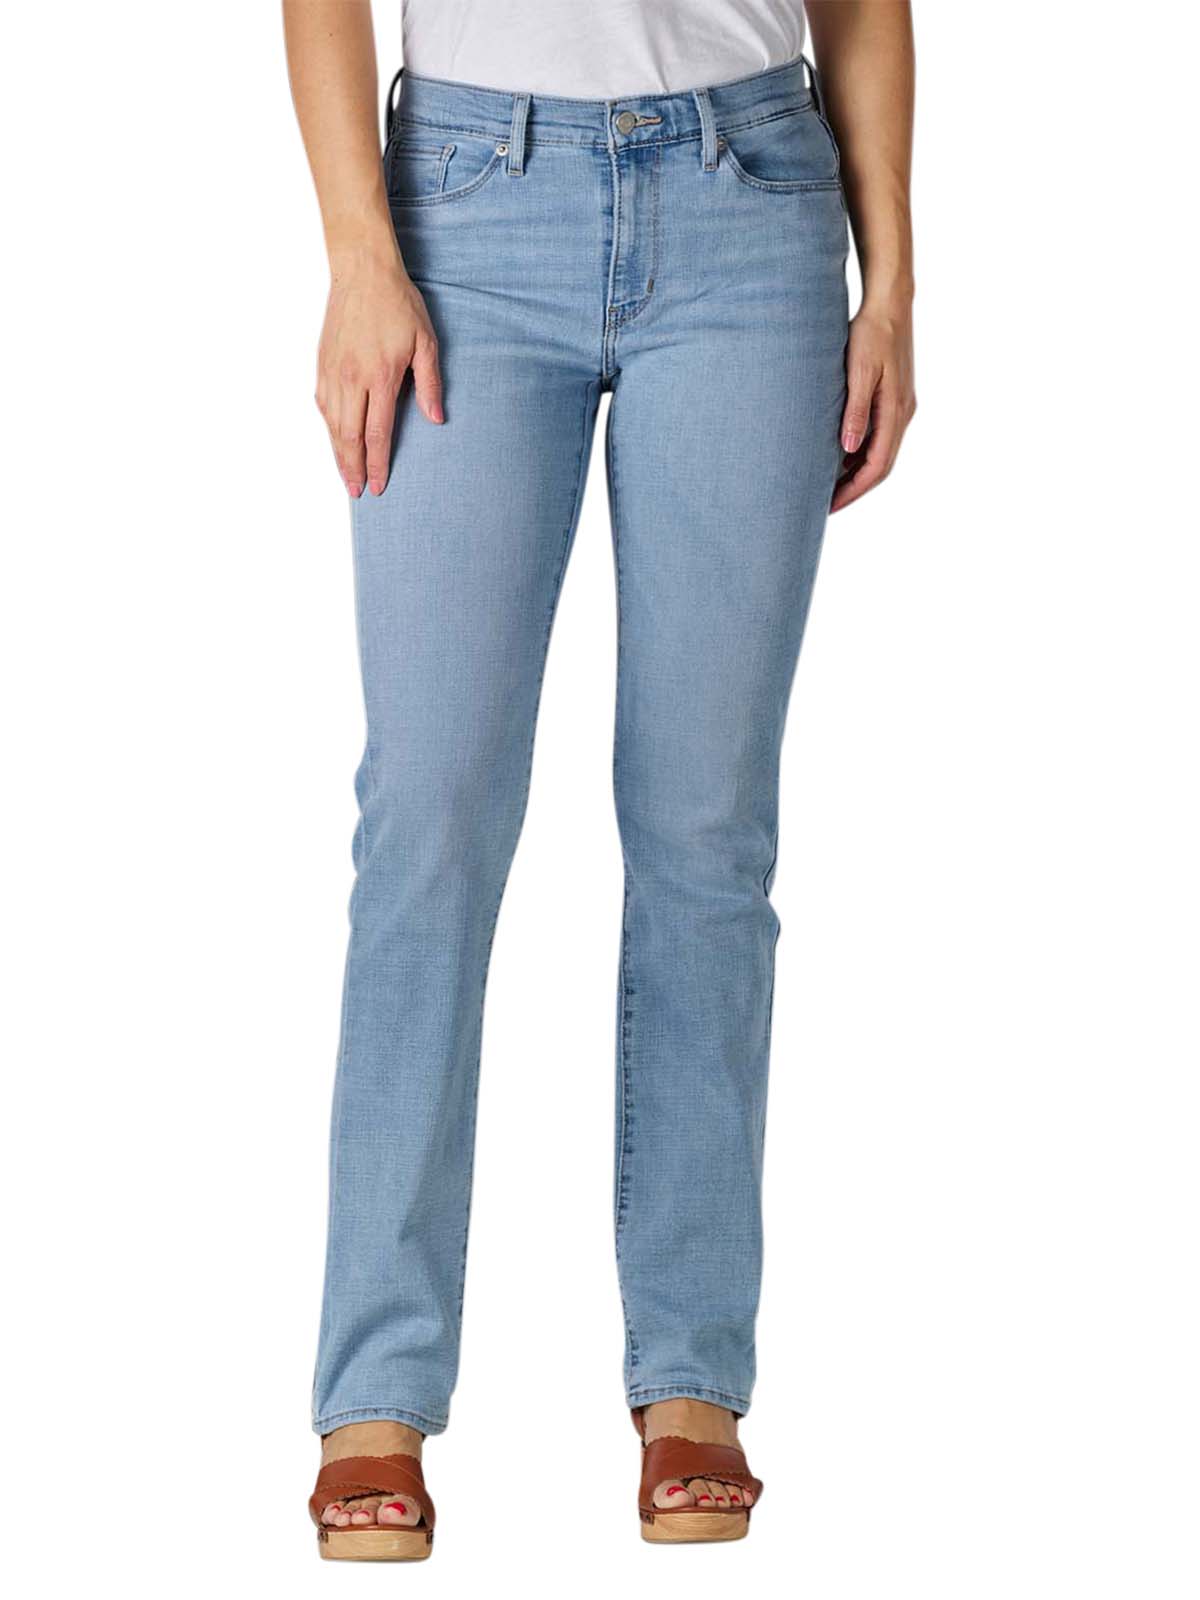 Levi's 712 Jeans Classic Straight slate oahu morning Levi's Women's Jeans |  Free Shipping on  - SIMPLY LOOK GOOD